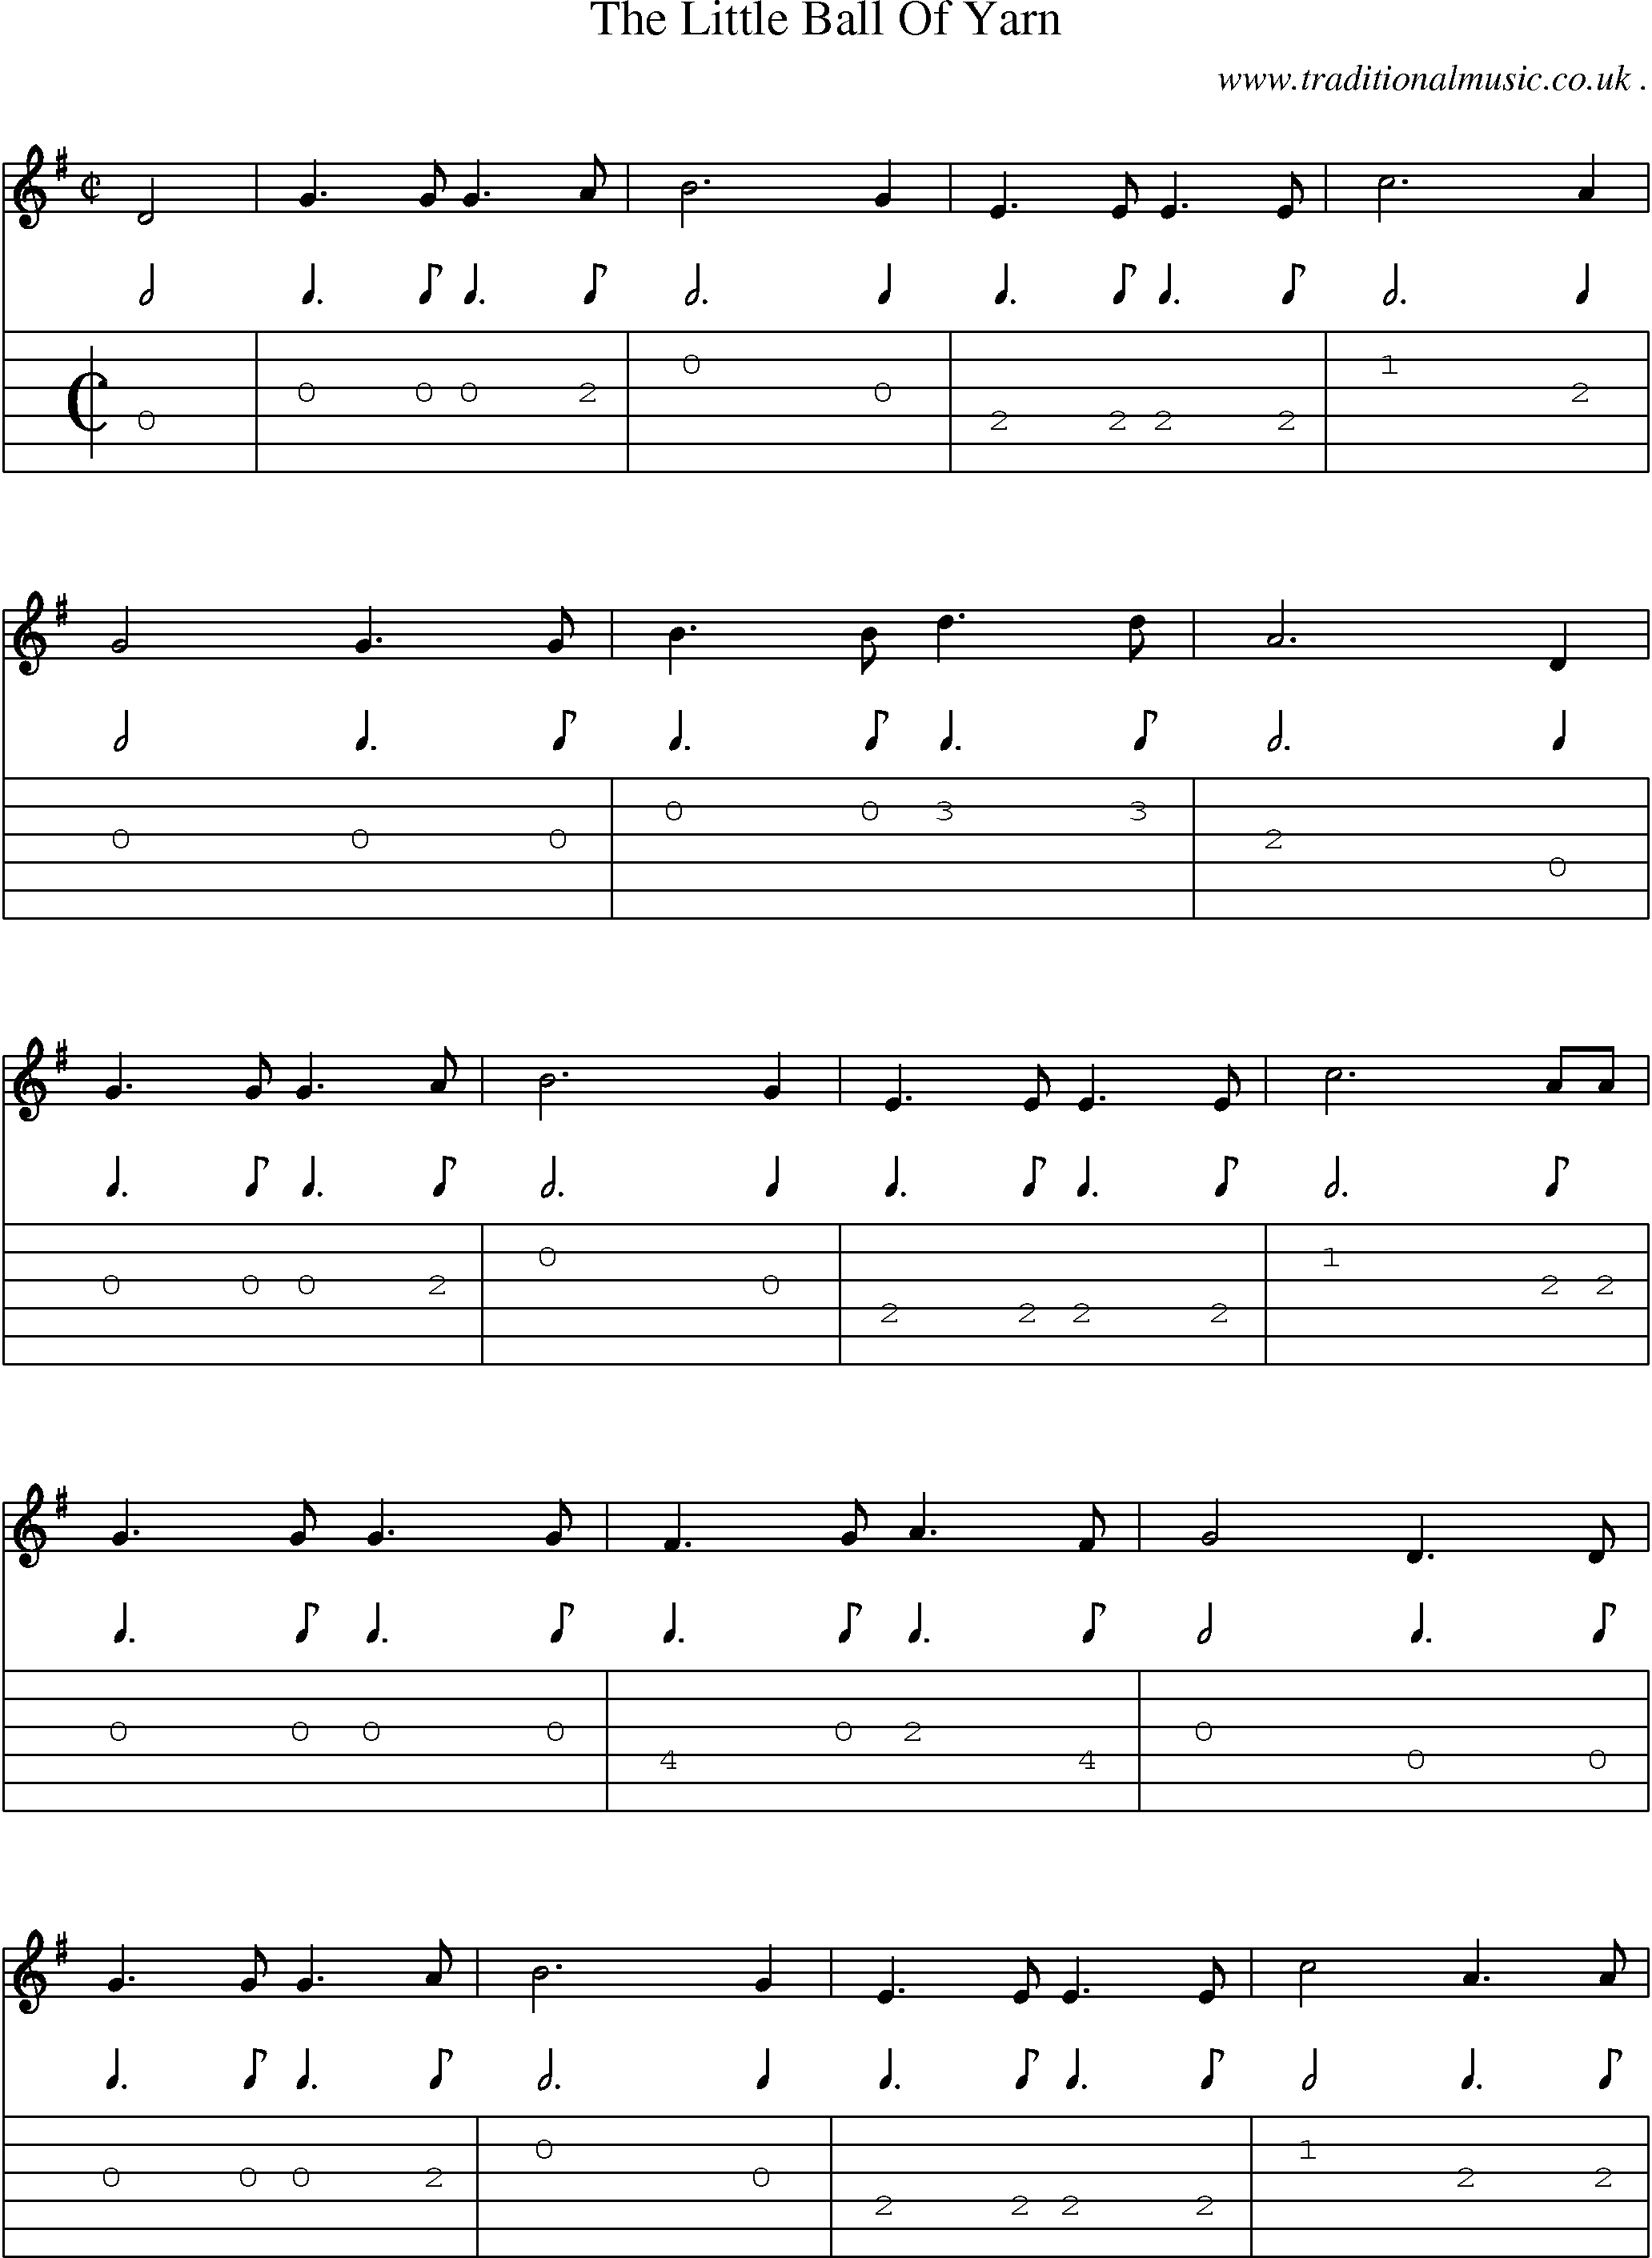 Sheet-Music and Guitar Tabs for The Little Ball Of Yarn